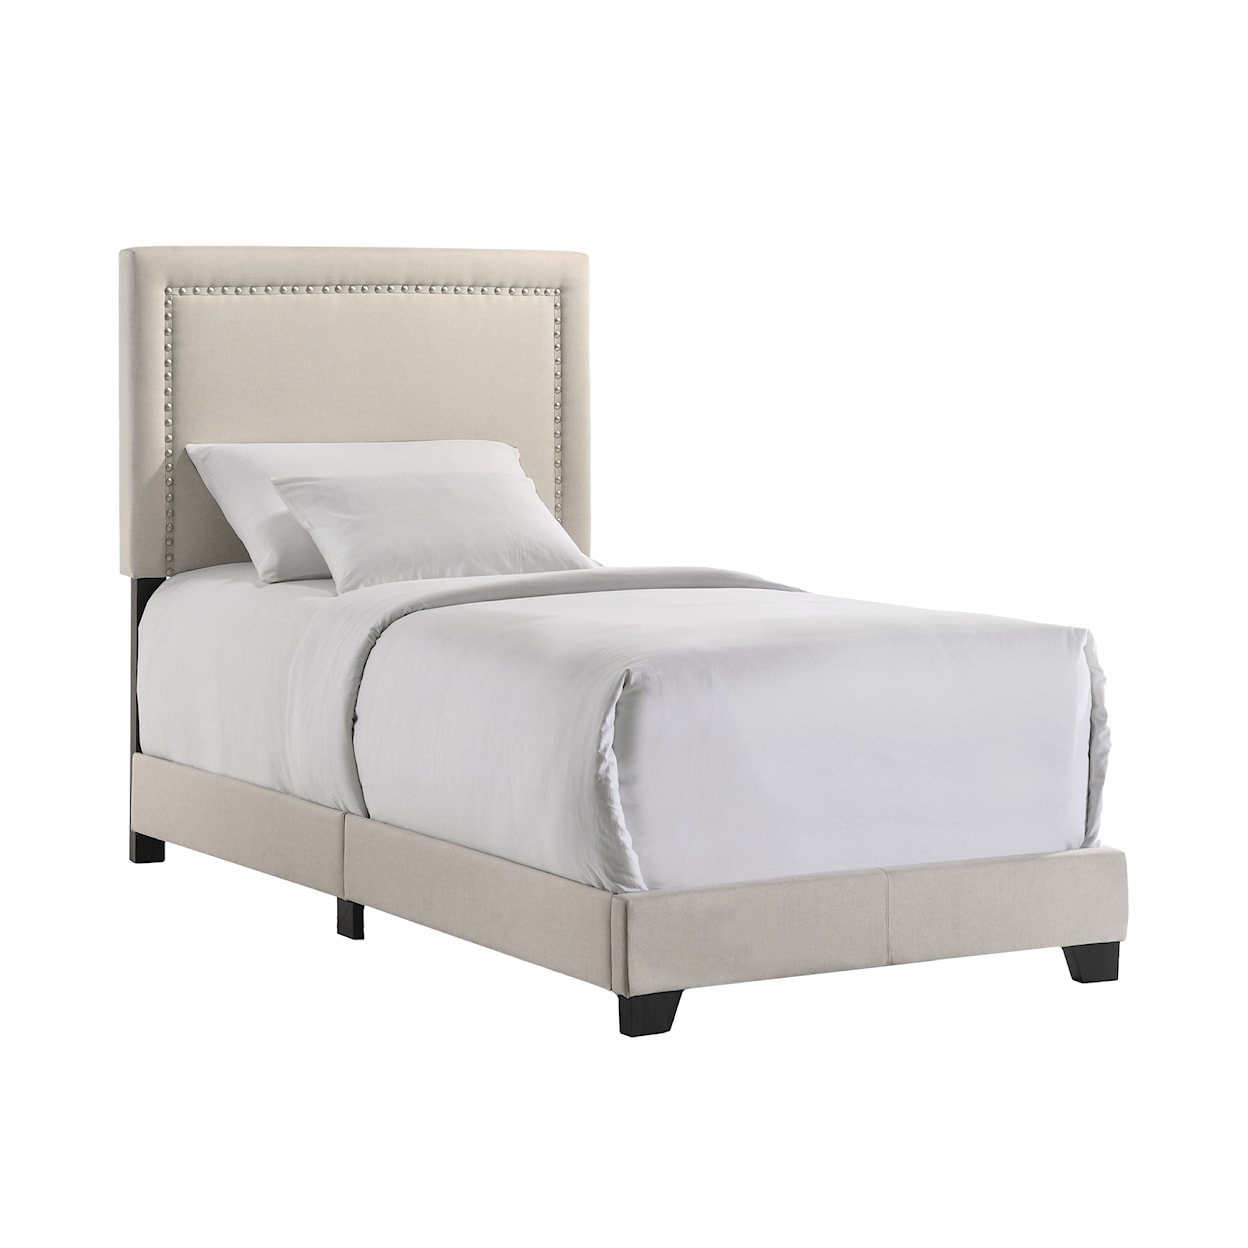 VFM Signature Upholstered Beds Zion Twin Upholstered Bed